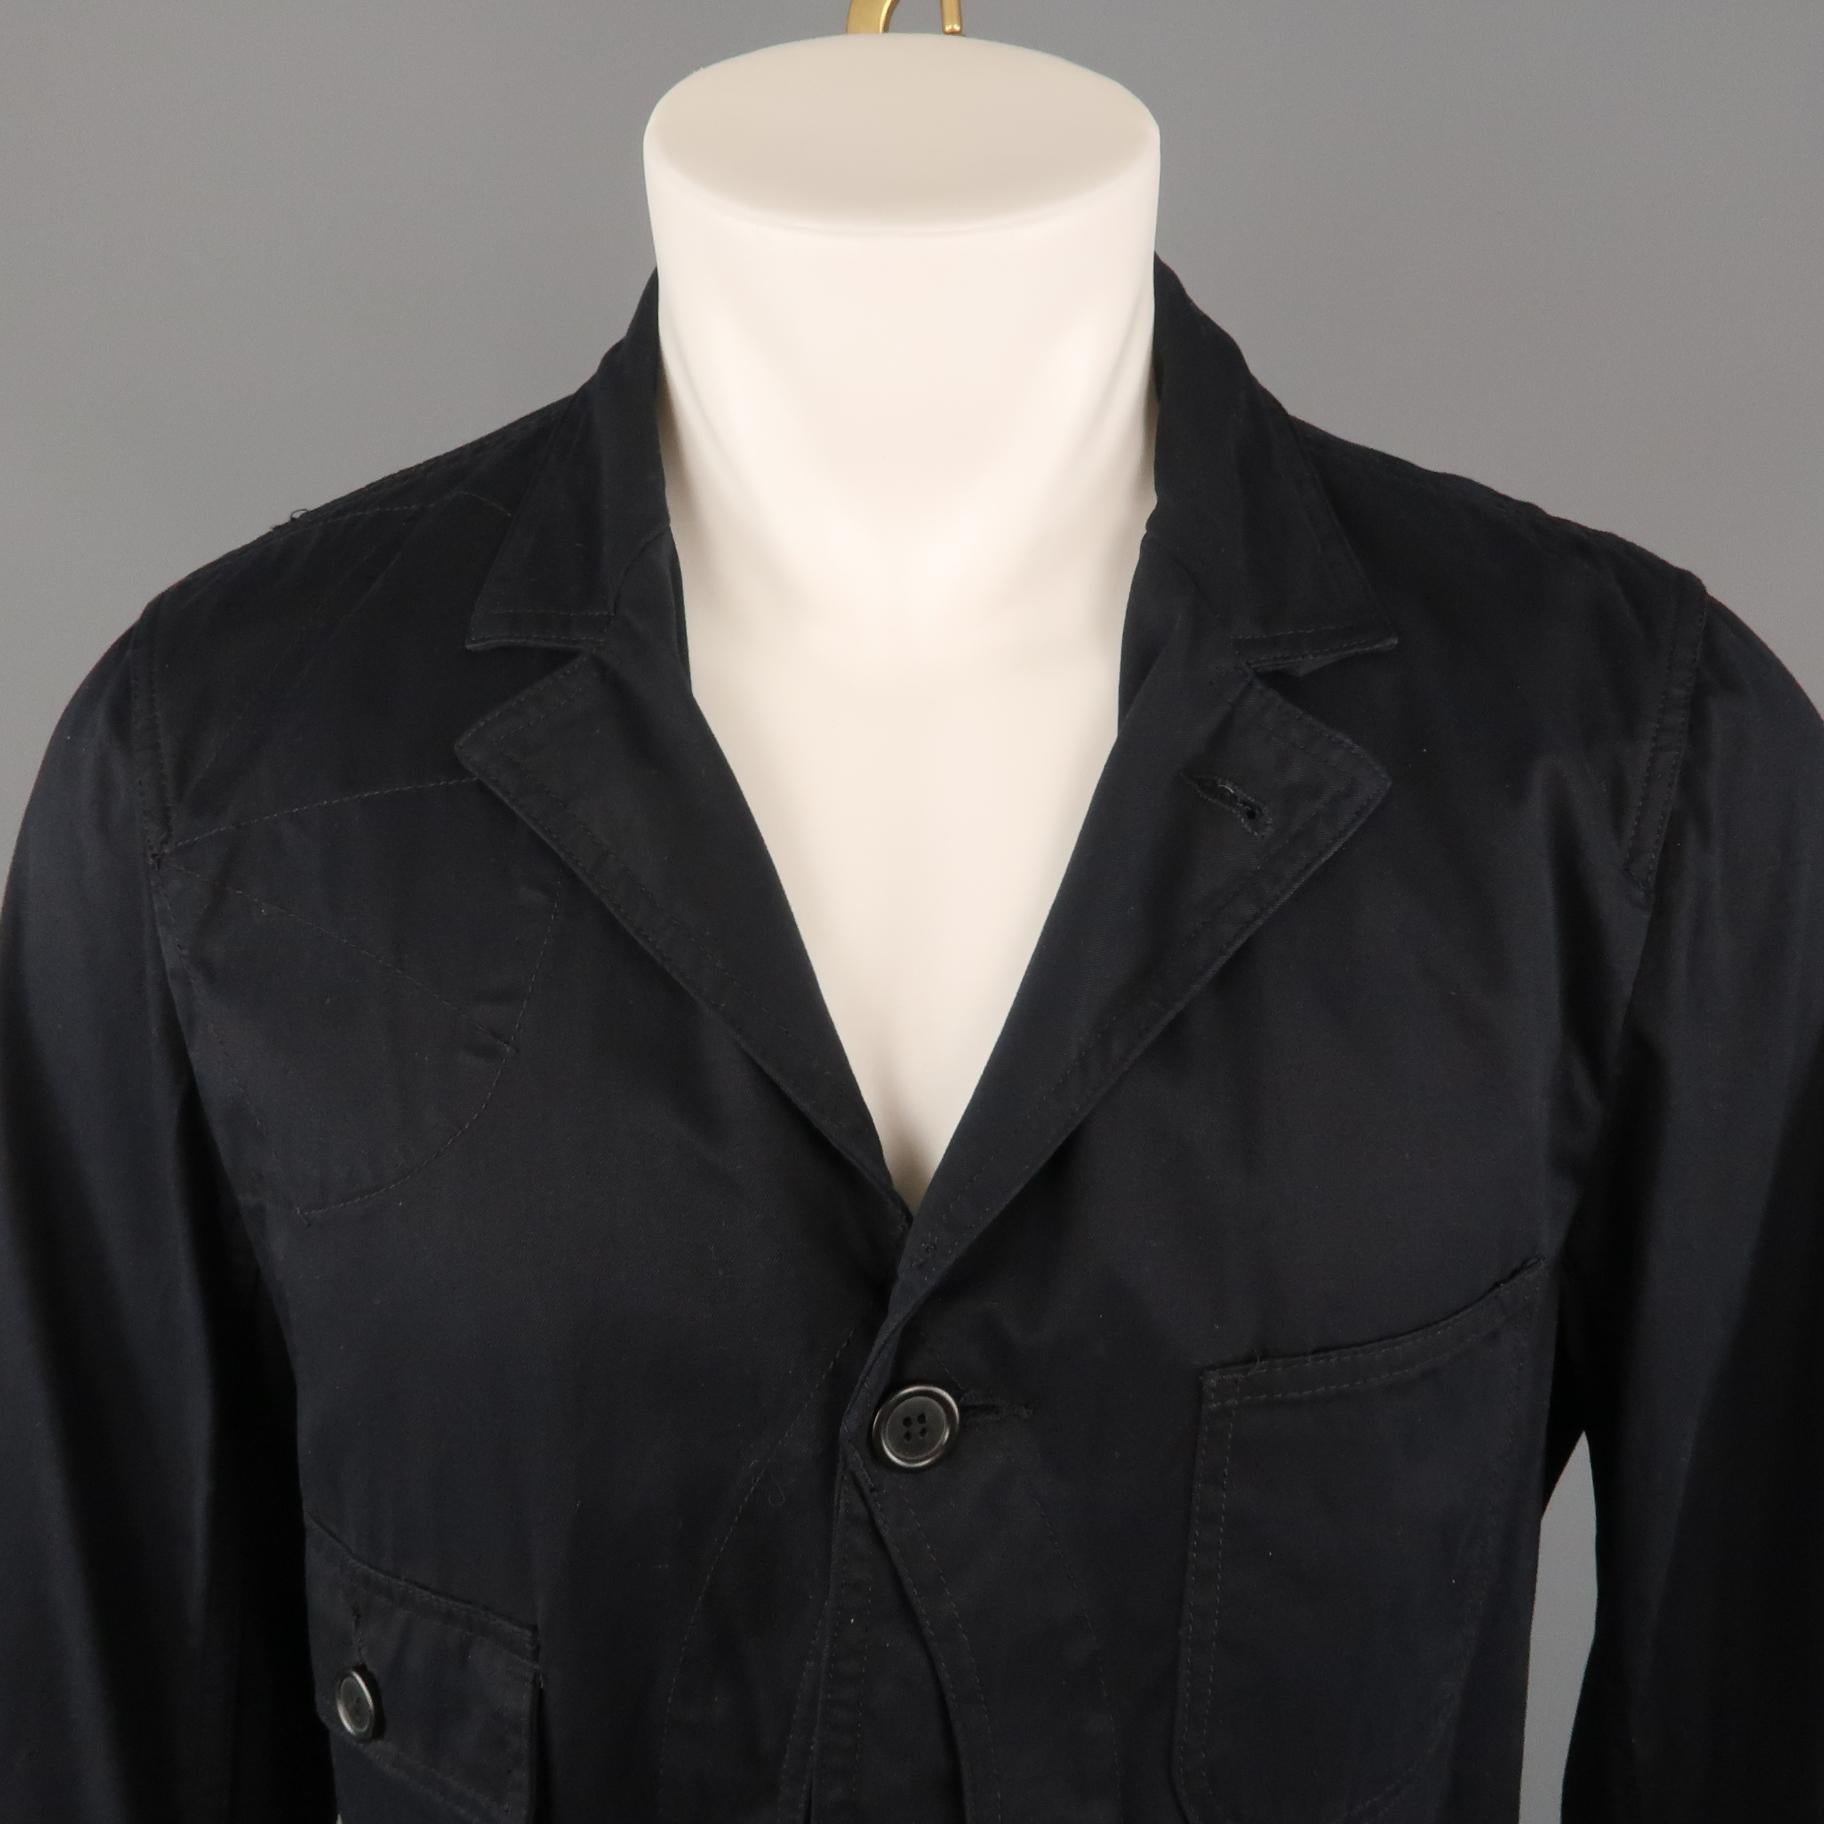 WOOLRICH jacket comes in a black cotton featuring a notch lapel, patch pocket details throughout, and a buttoned closure. Made in USA
 
Excellent Pre-Owned Condition.
Marked: M
 
Measurements:
 
Shoulder: 17.5 in.
Chest: 40 in.
Sleeve: 26.5